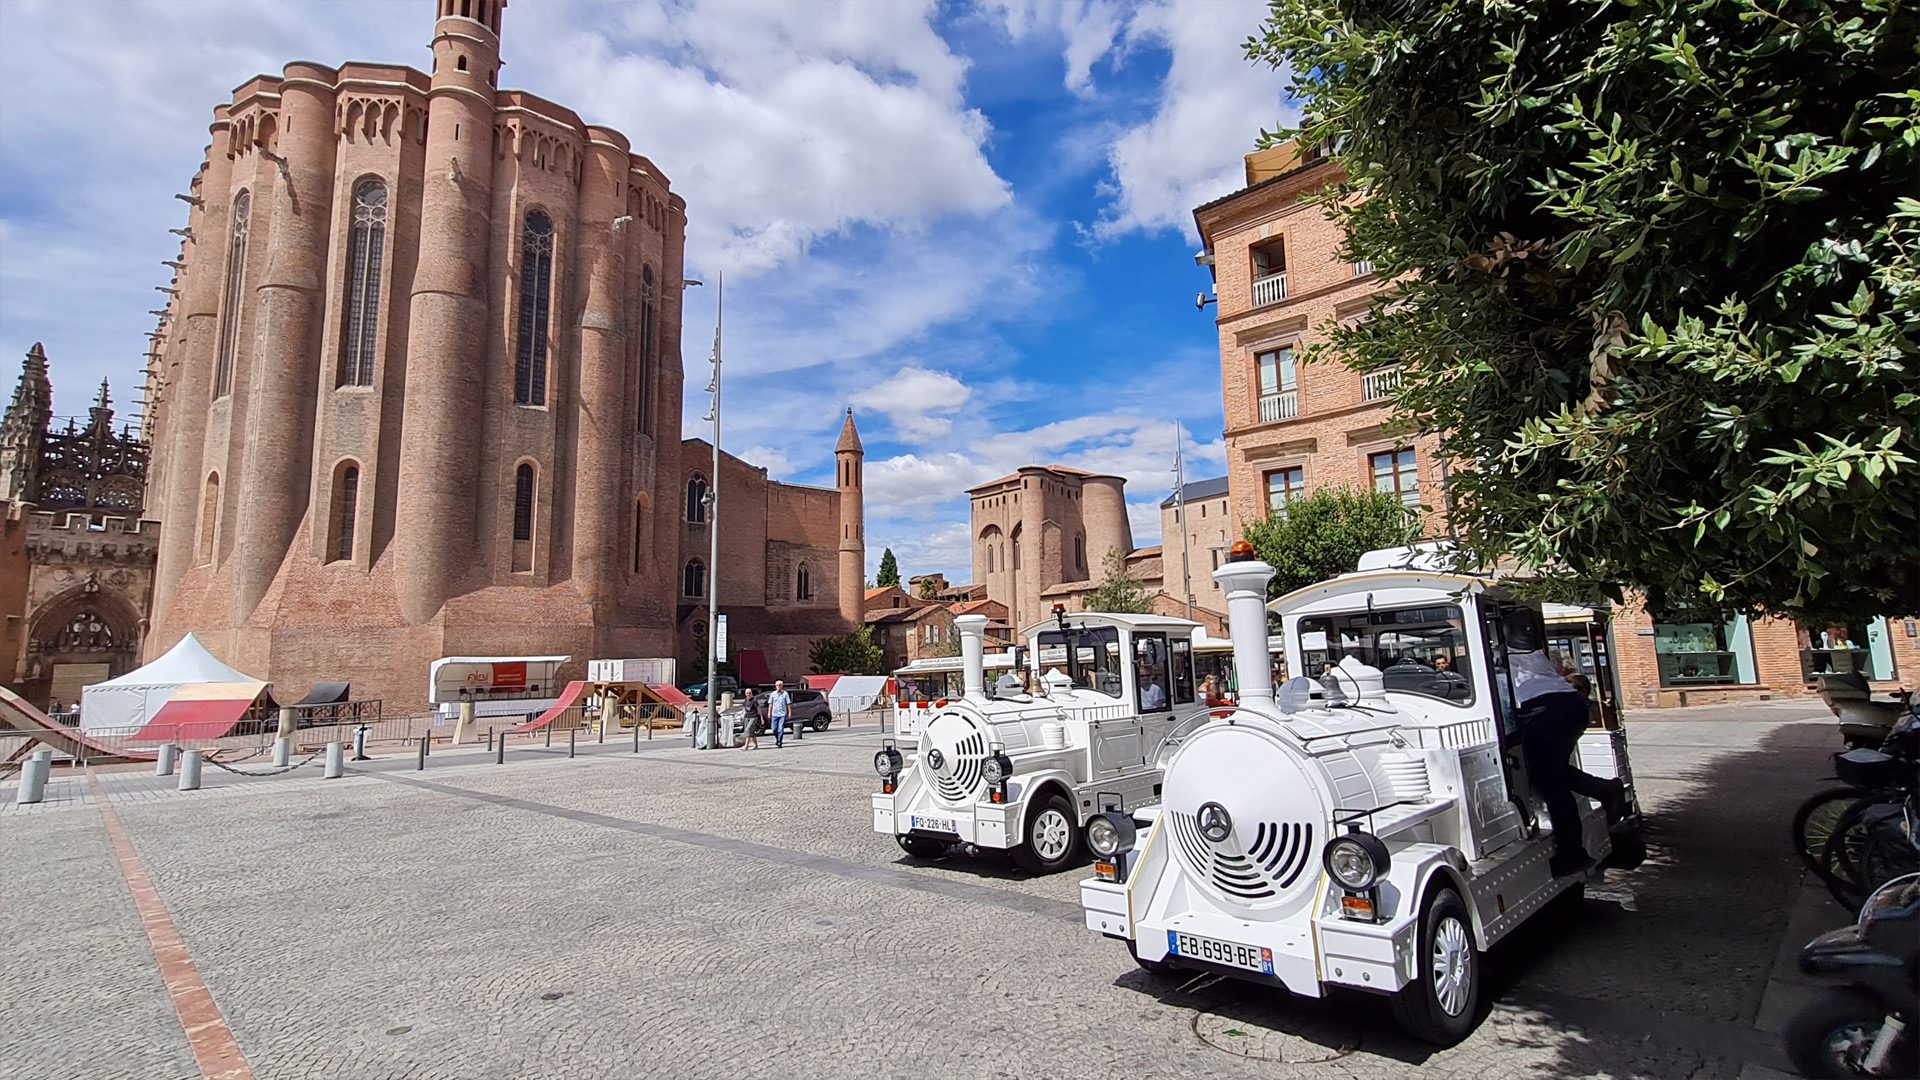 City tour - Albi in a little tourist train, a timeless visit